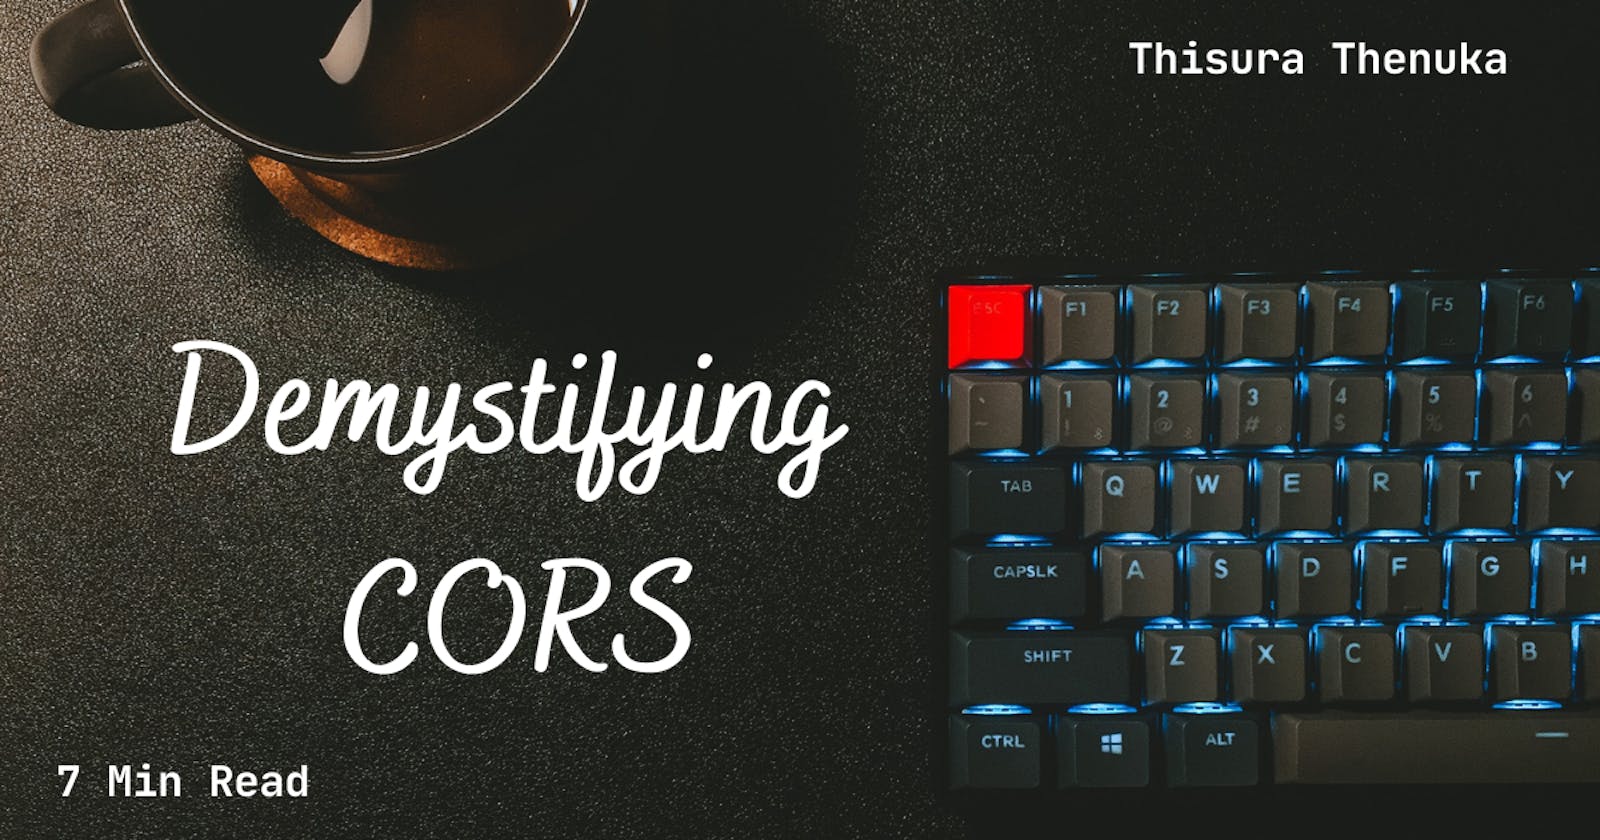 Demystifying CORS - Everything You Need to Know